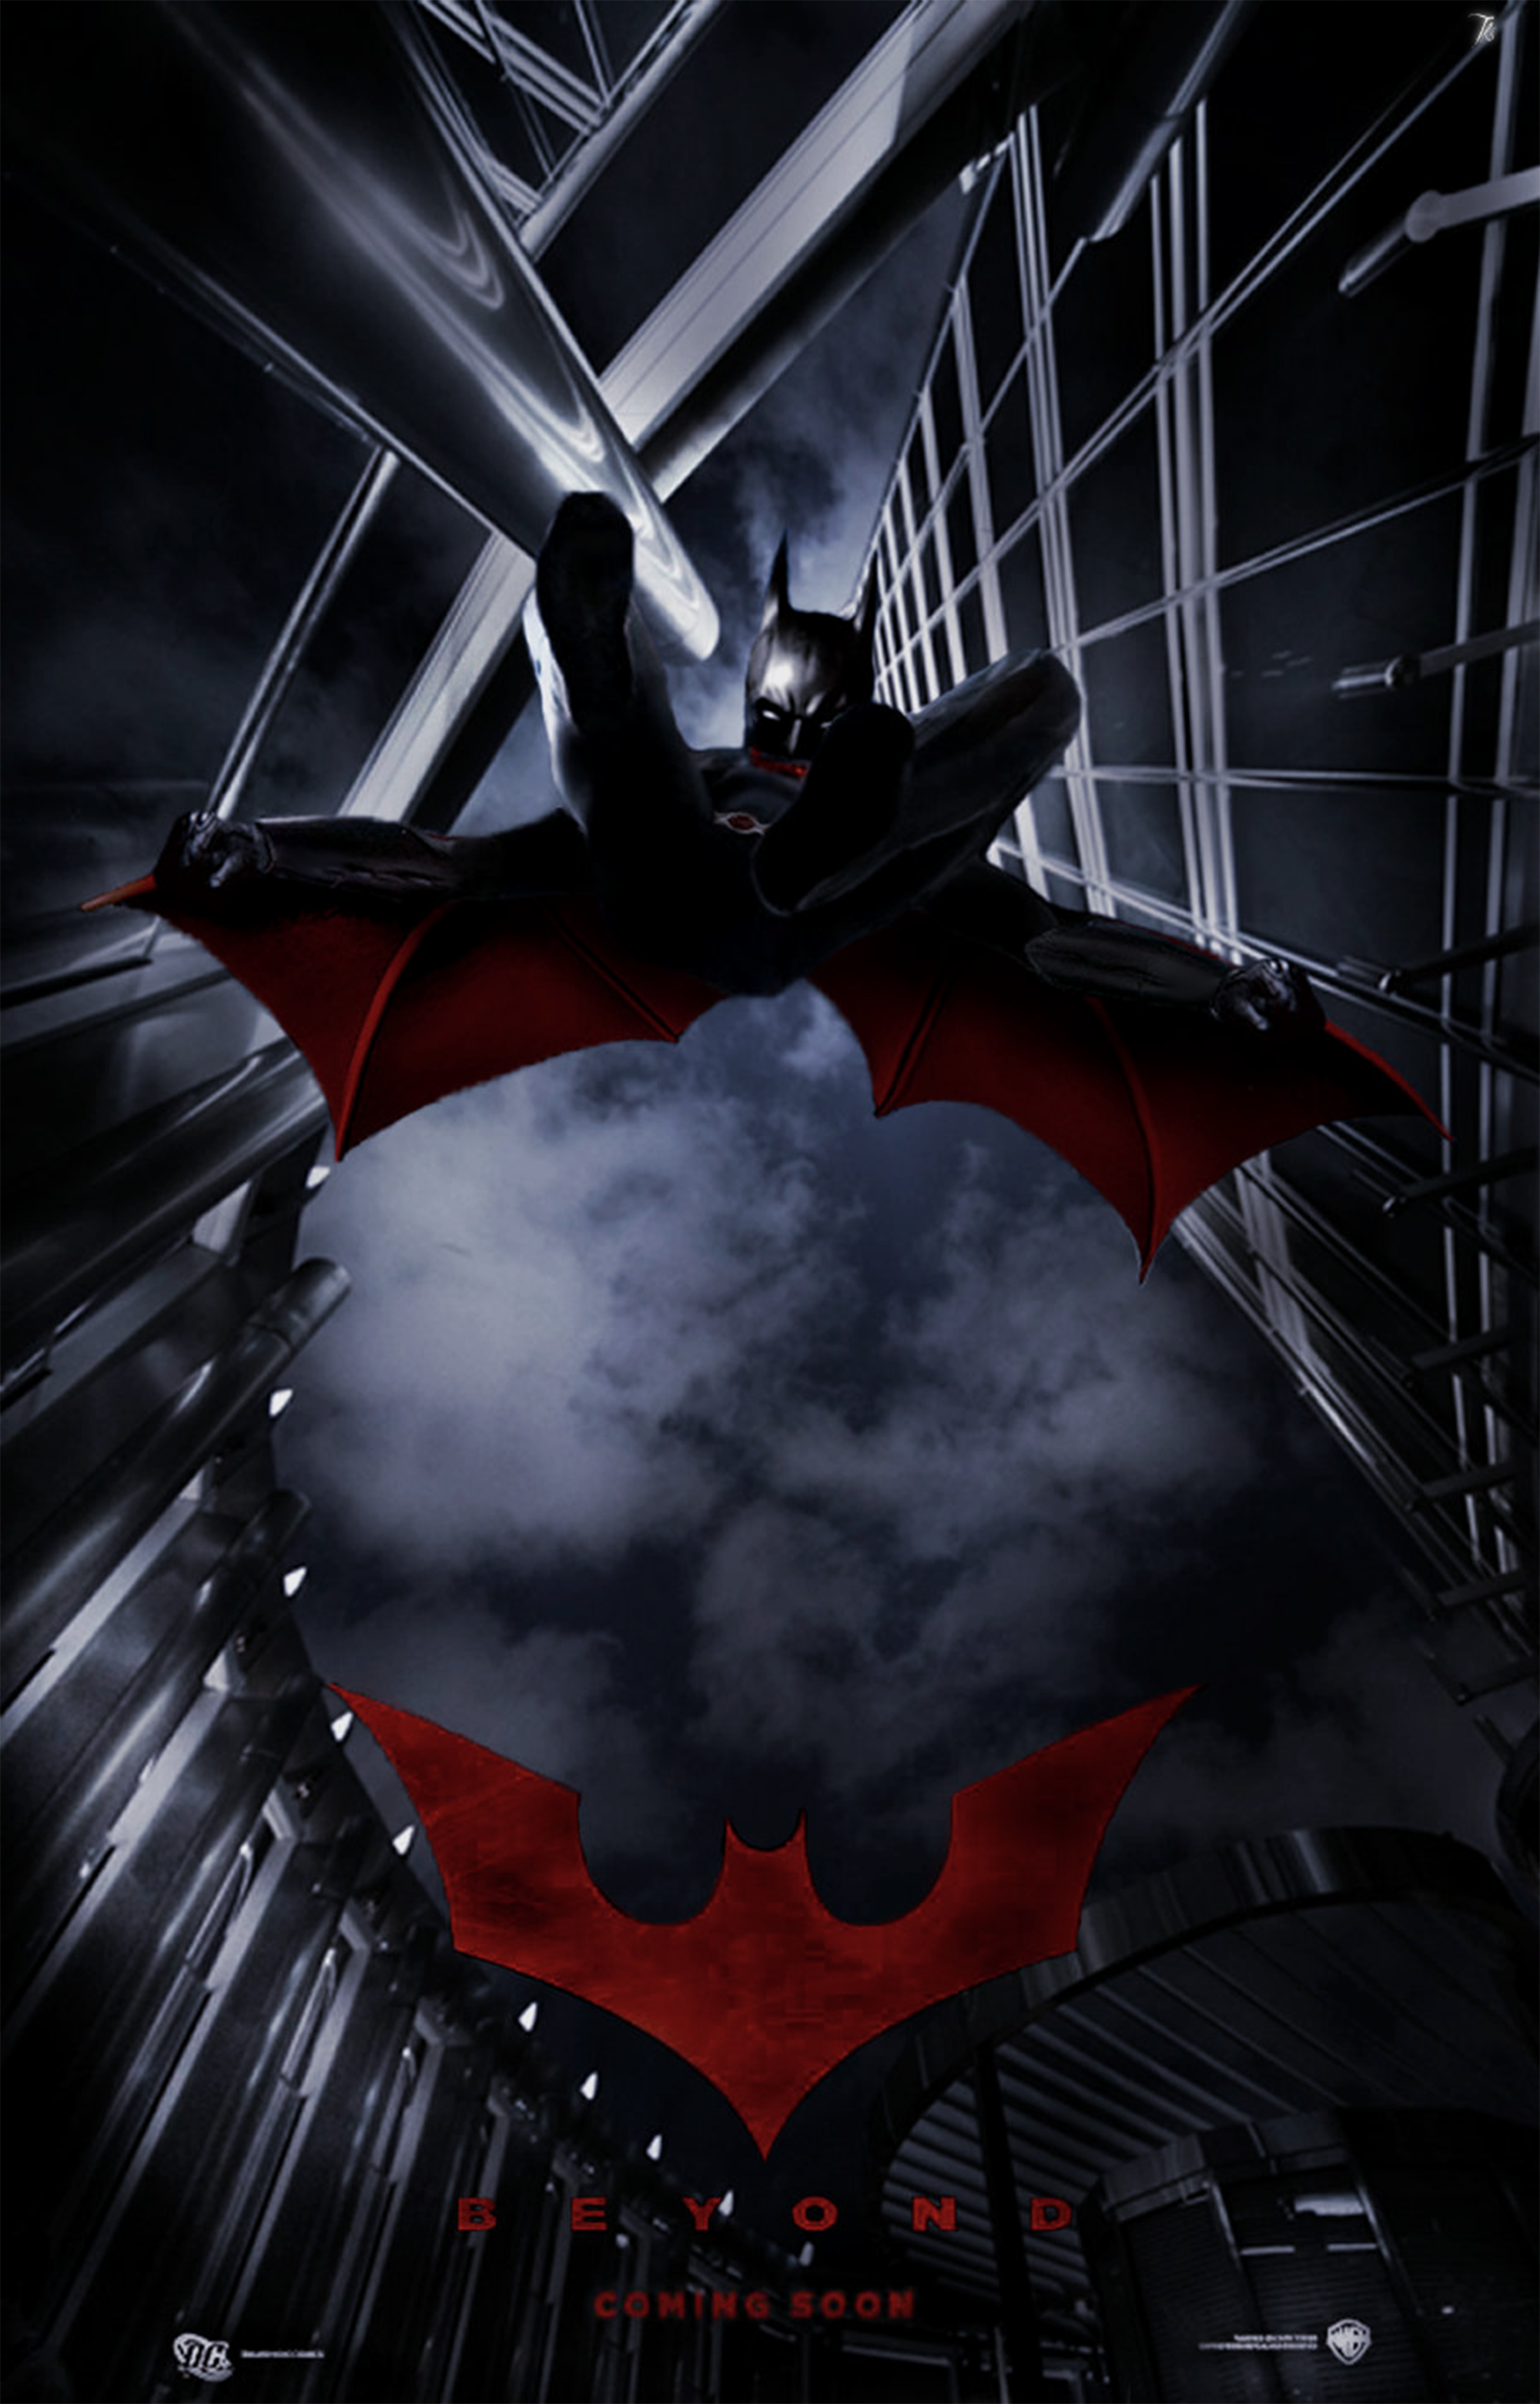 Vamers-Artistry-Celebrate-15-Years-of-Batman-Beyond-with-these-Fan-Made-Posters-Theo-Kyp-Serenno